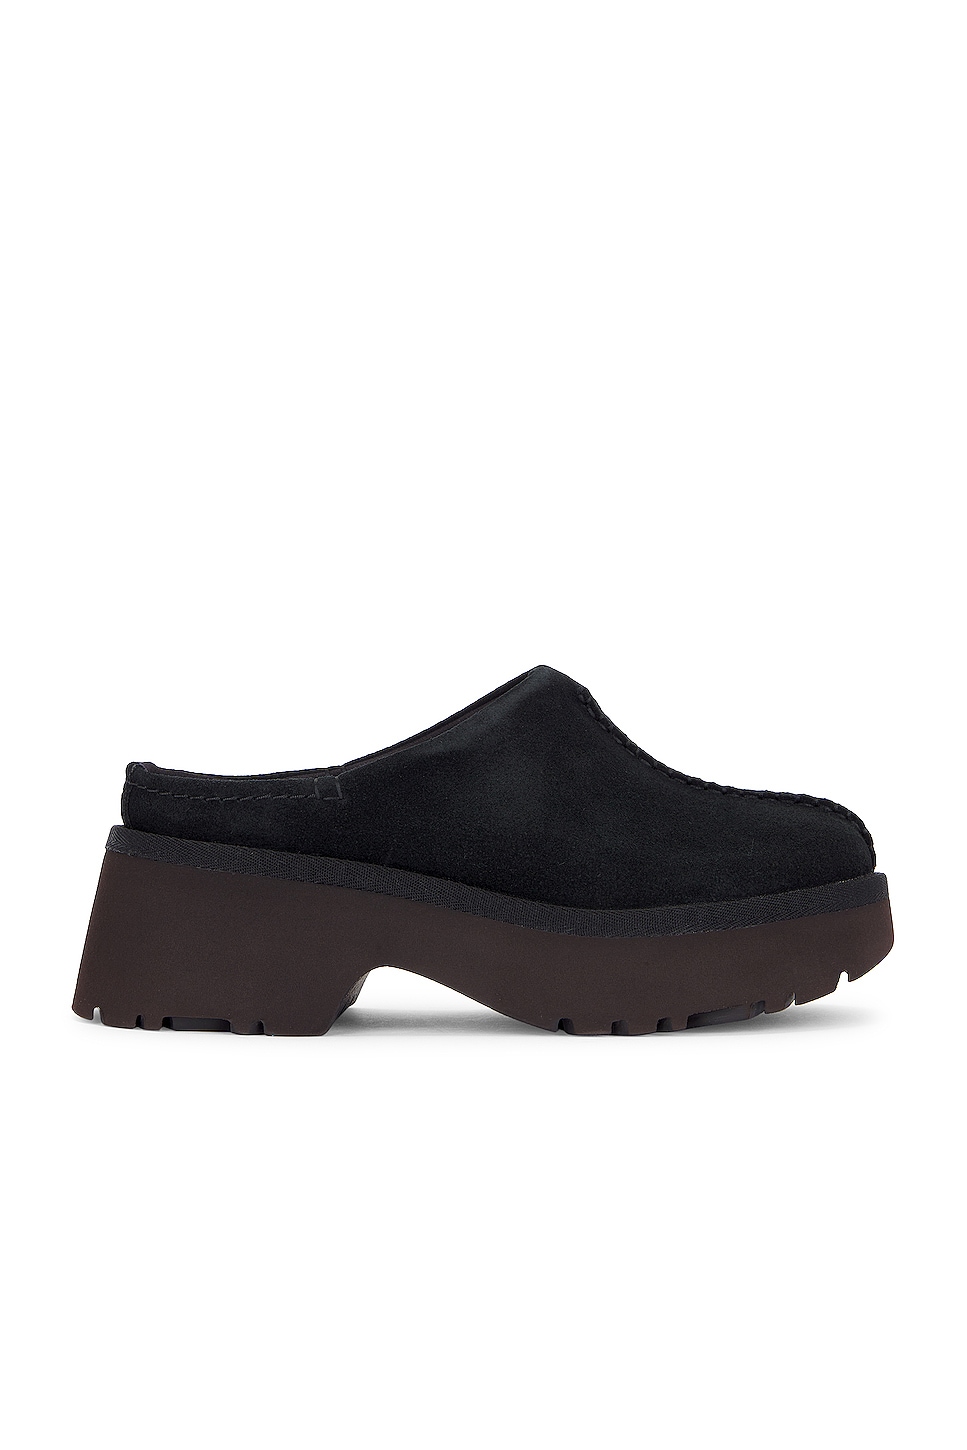 Image 1 of UGG New Heights Clog in Black